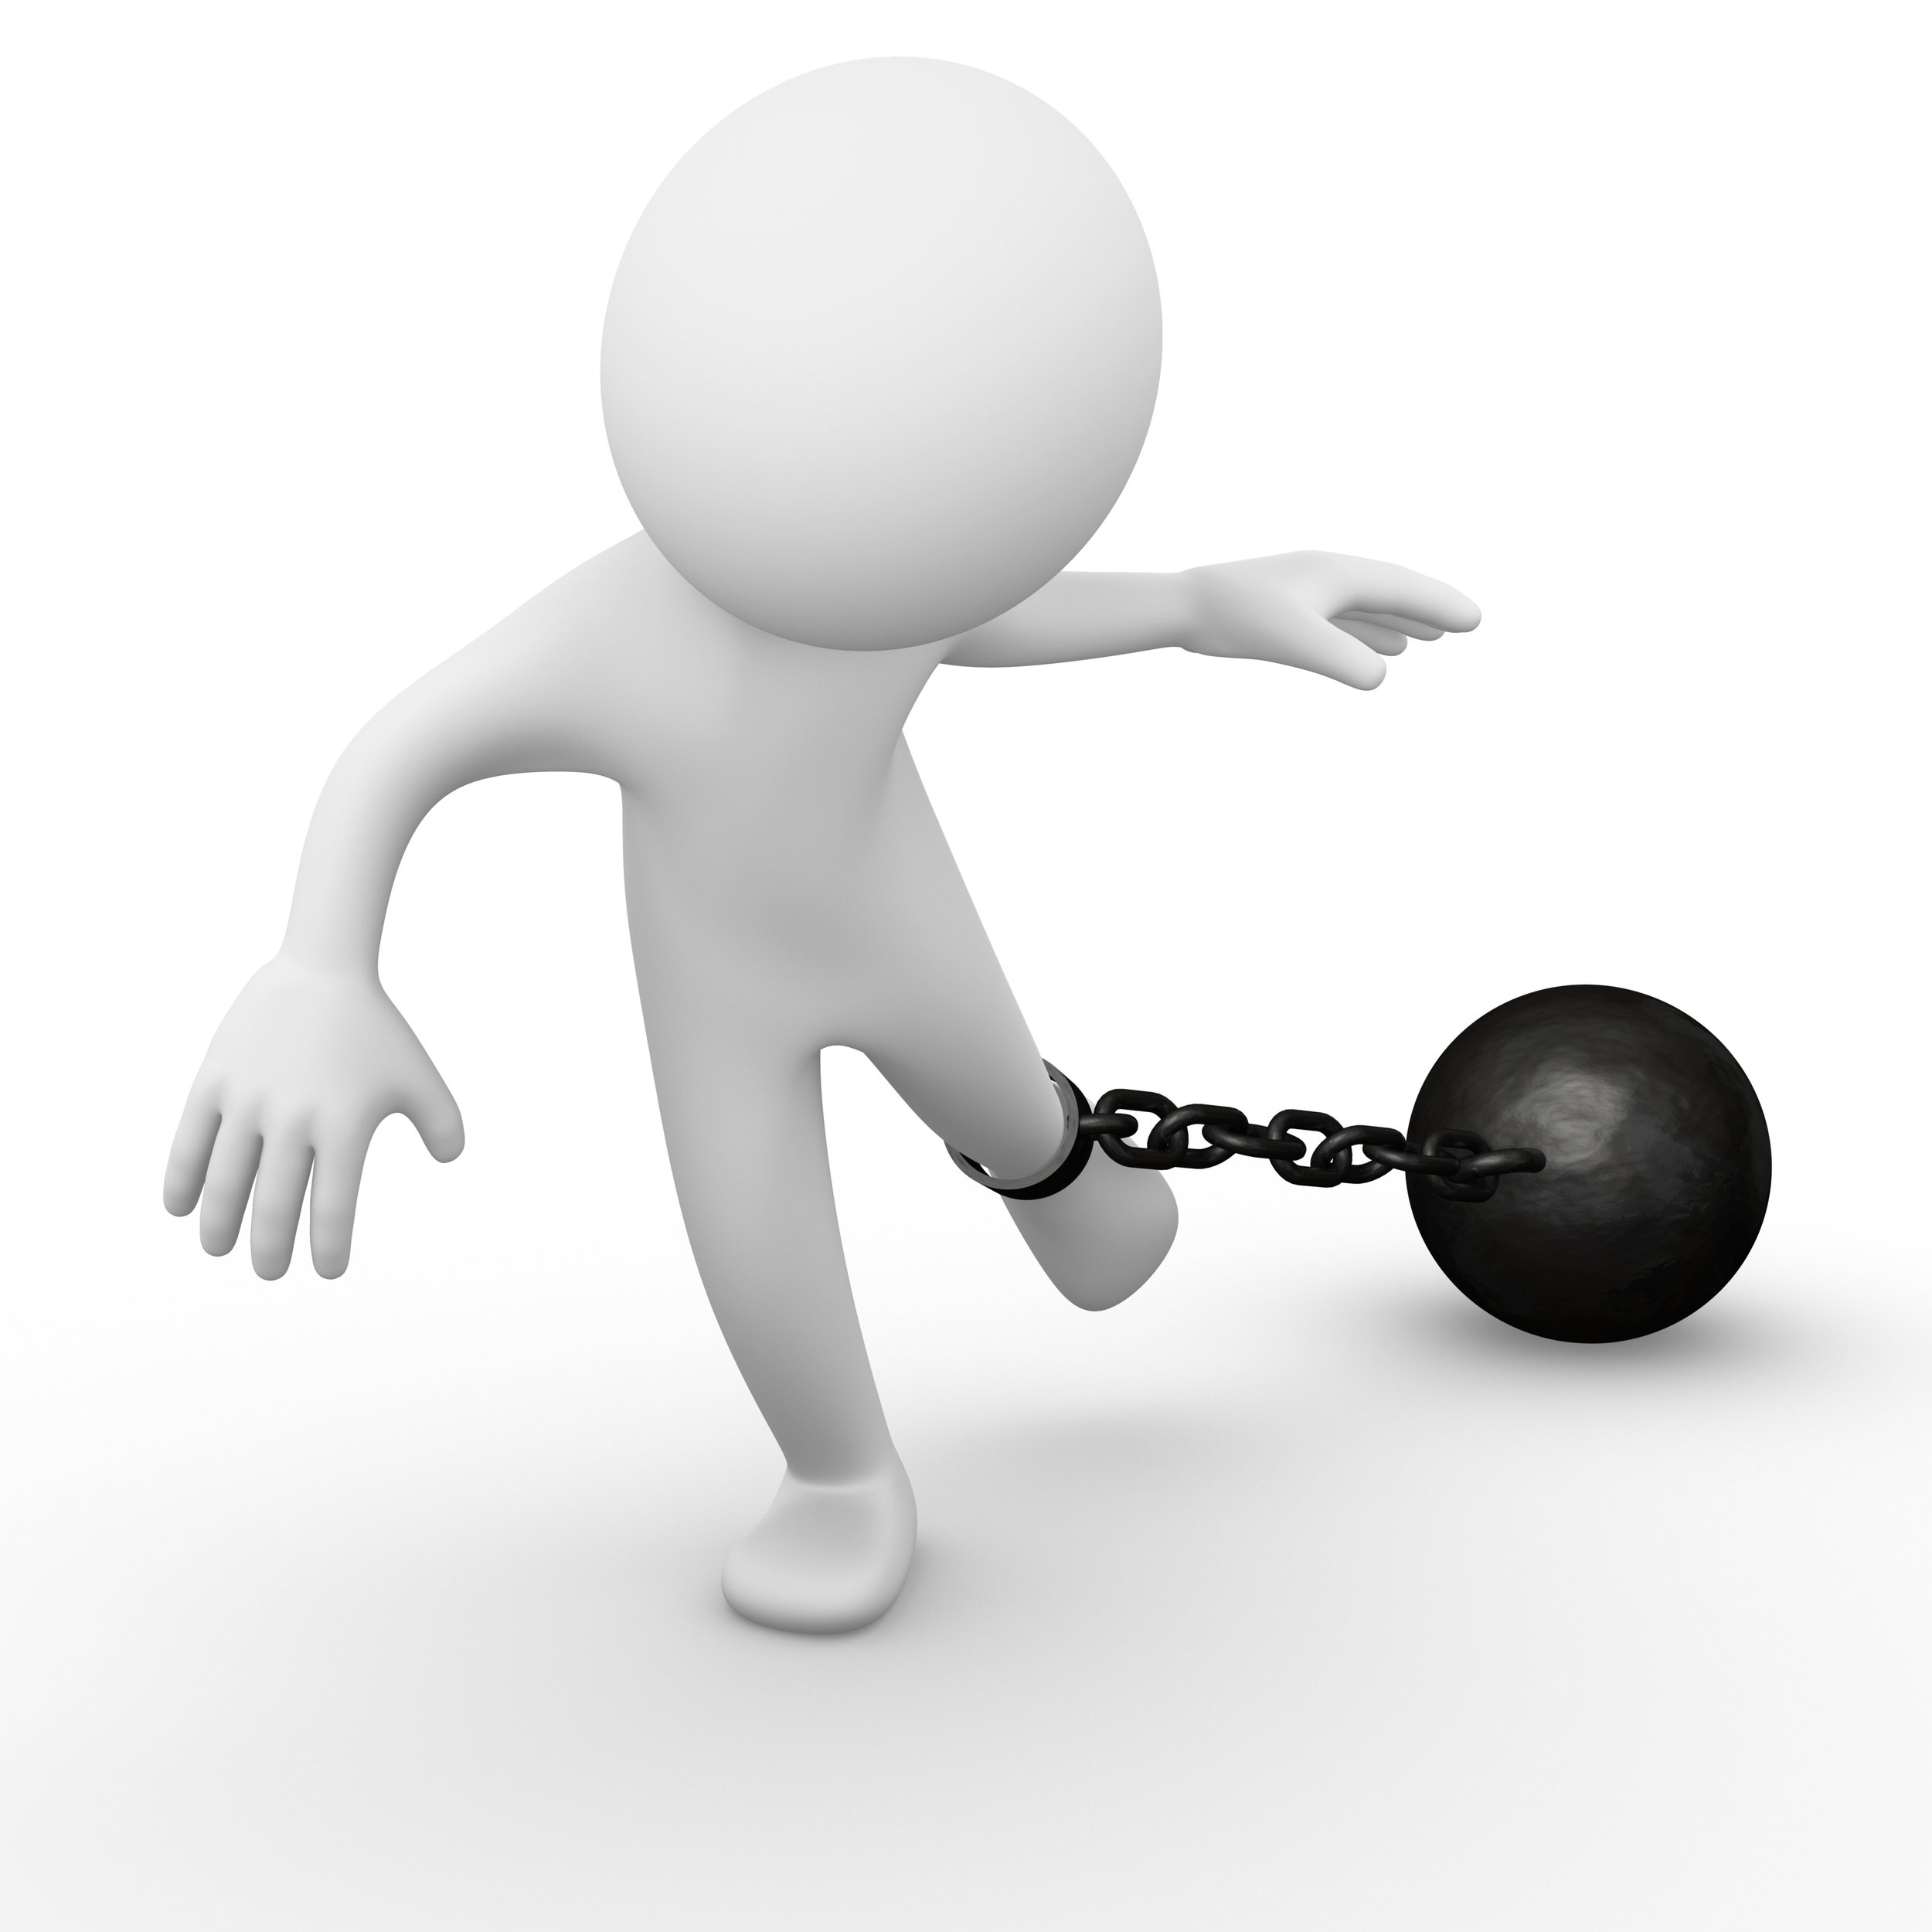 Leadership is a Verb ™: What is your ball and chain?